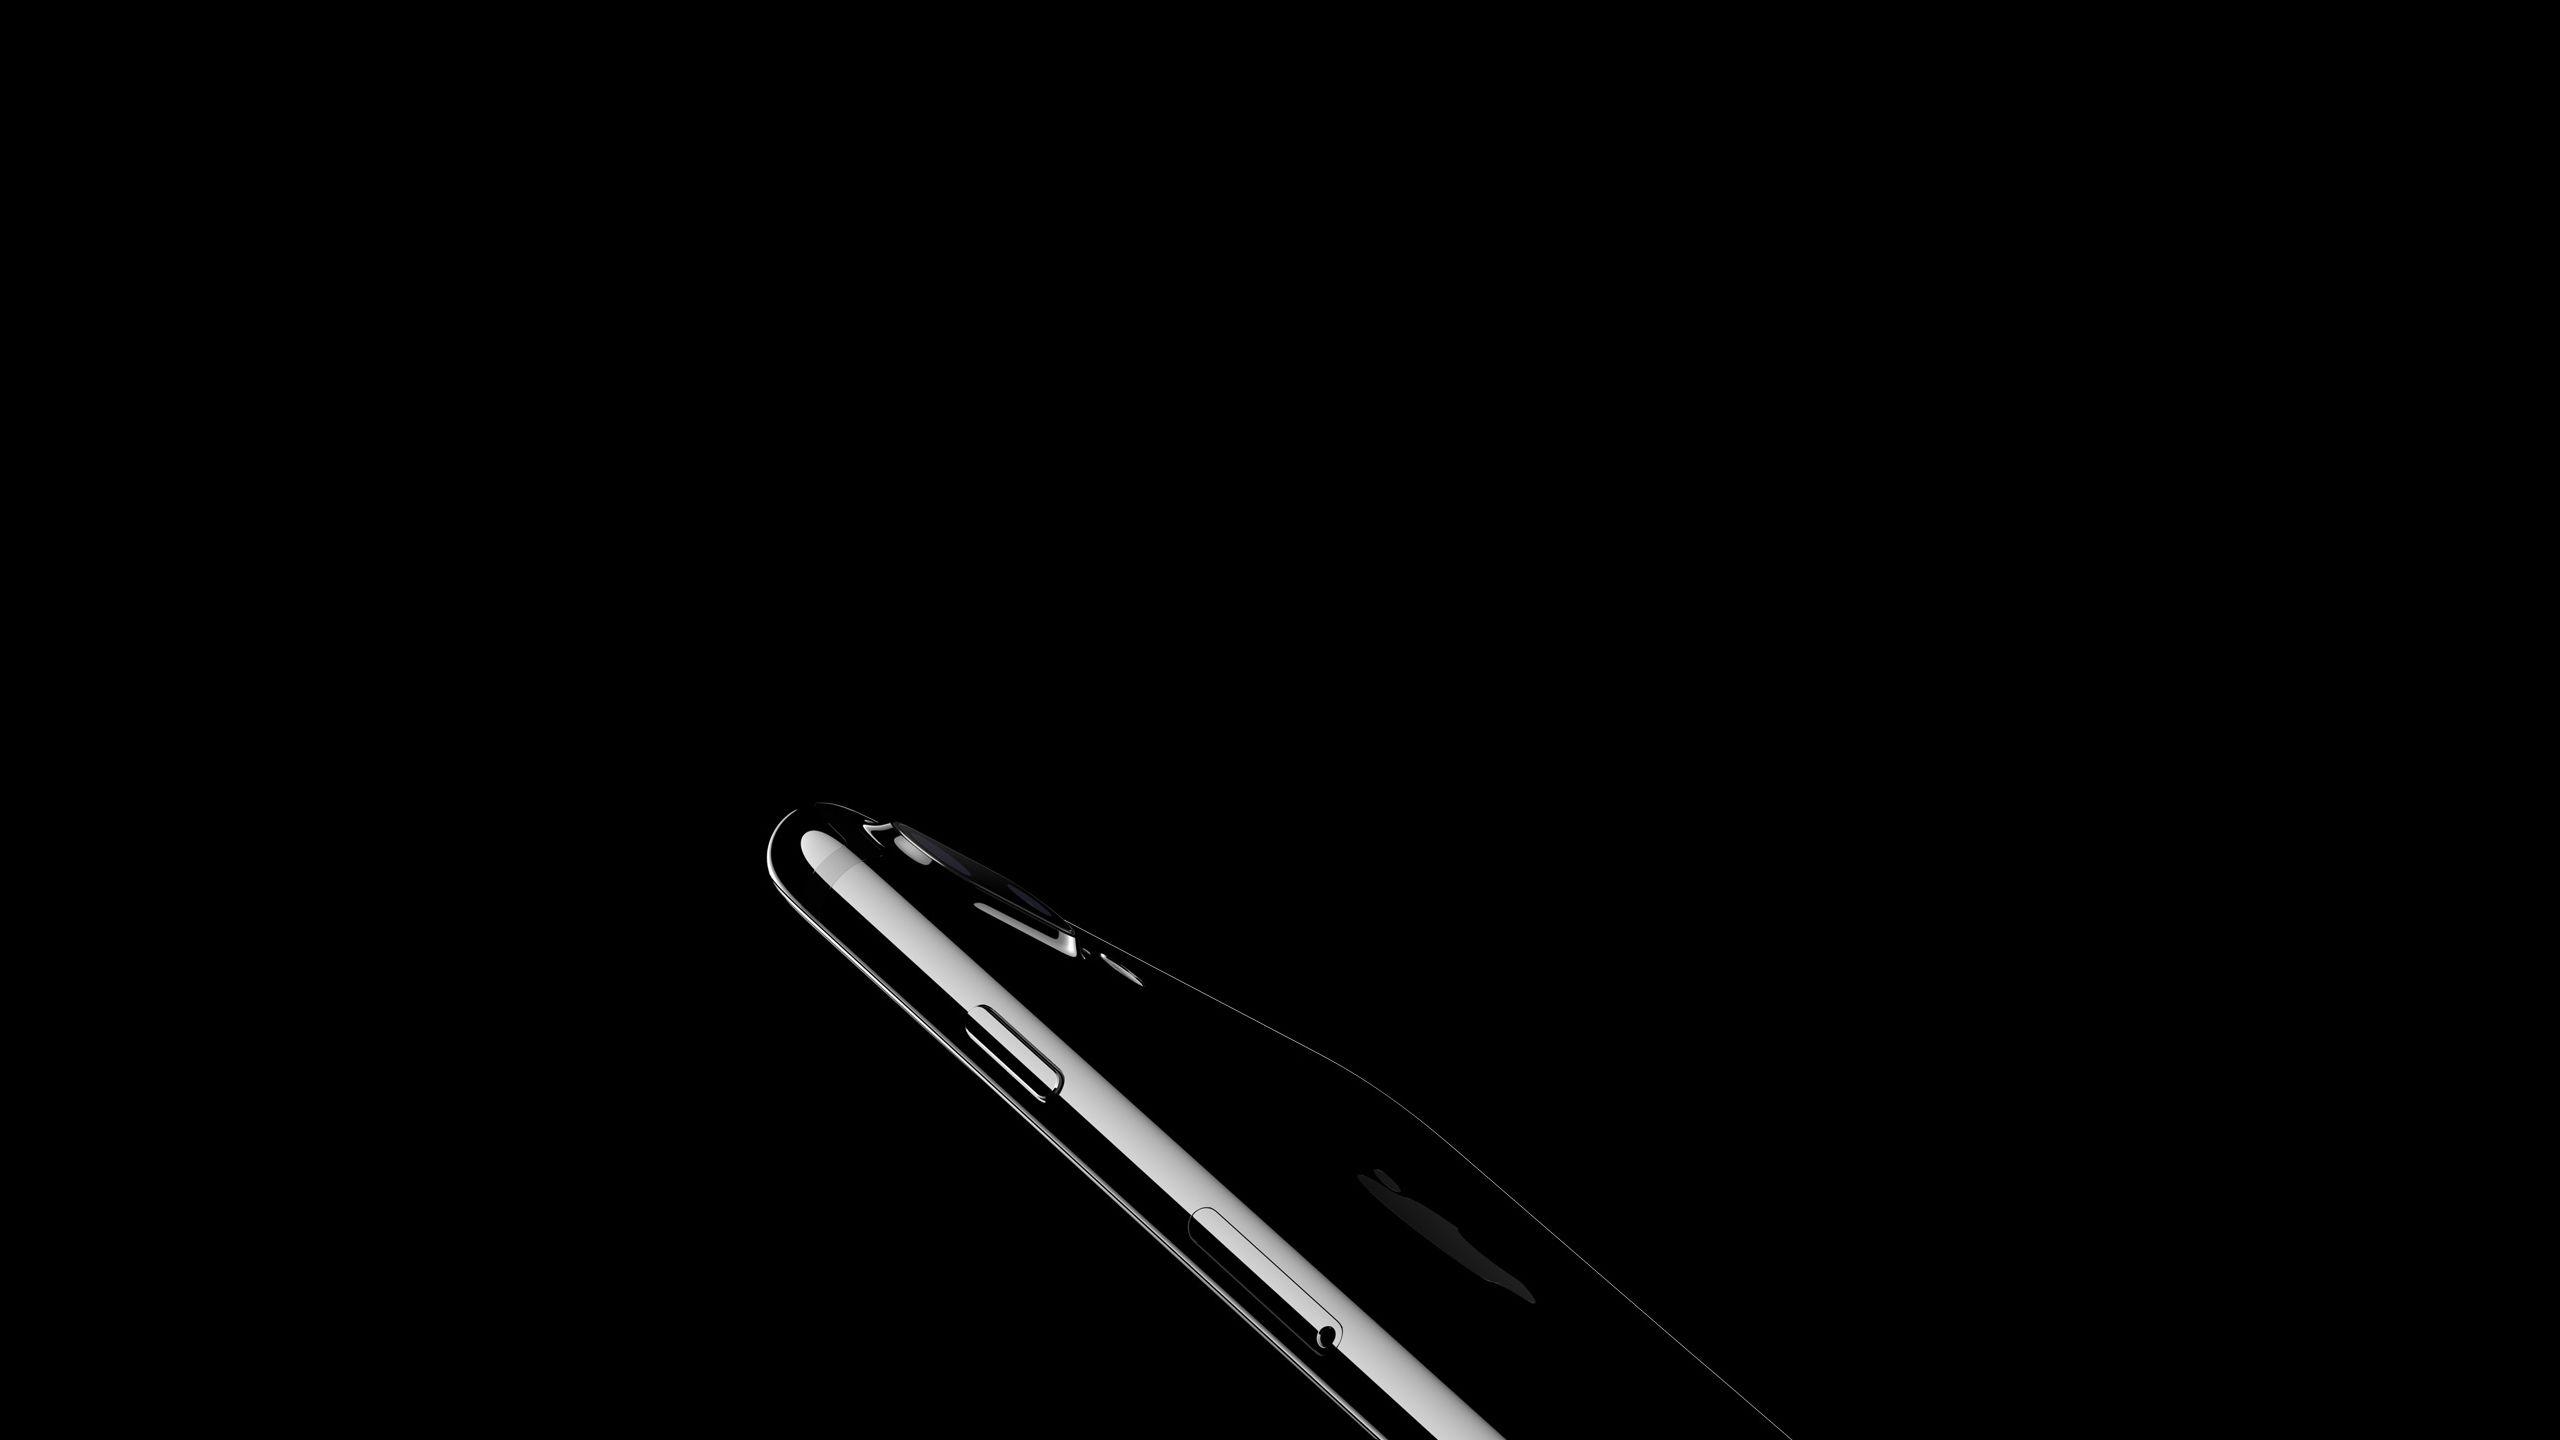 Wallpaper: photo taken with an iPhone 7